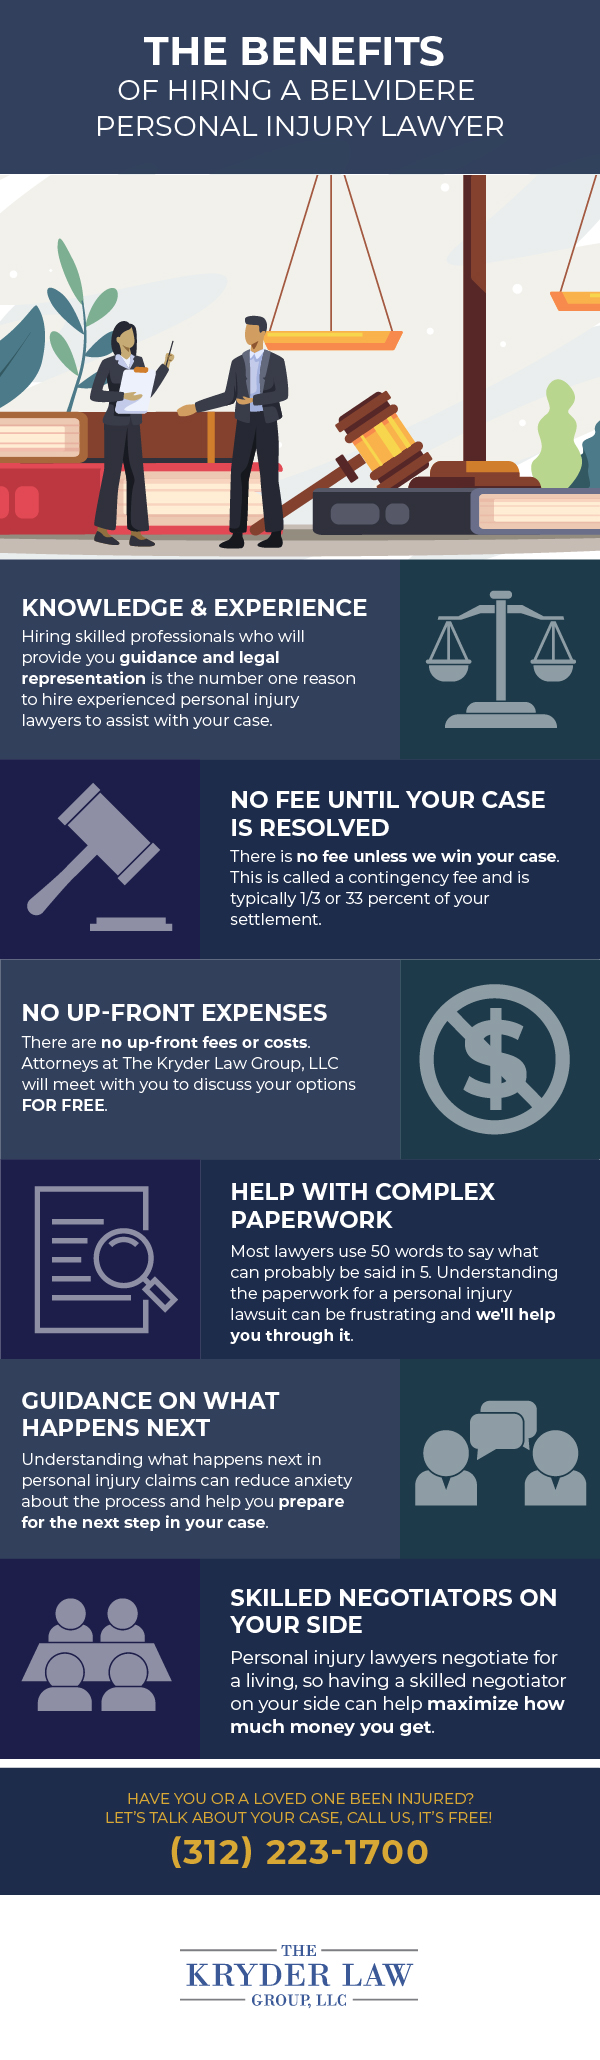 Belvidere Personal Injury Lawyer Infographic